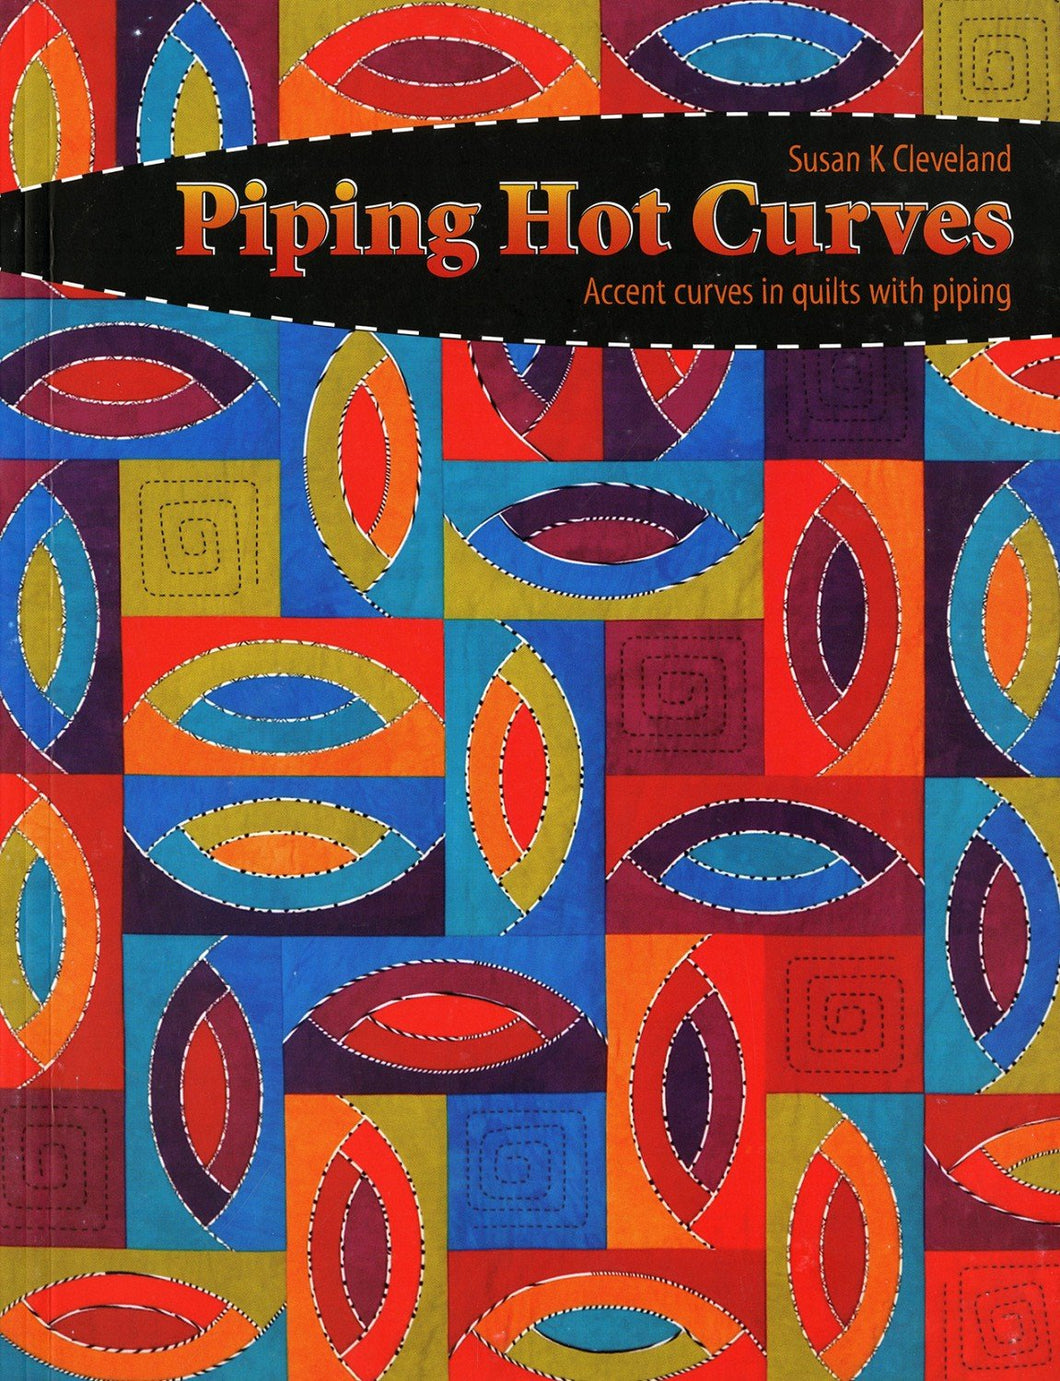 Piping Hot Curves by Susan K Cleveland